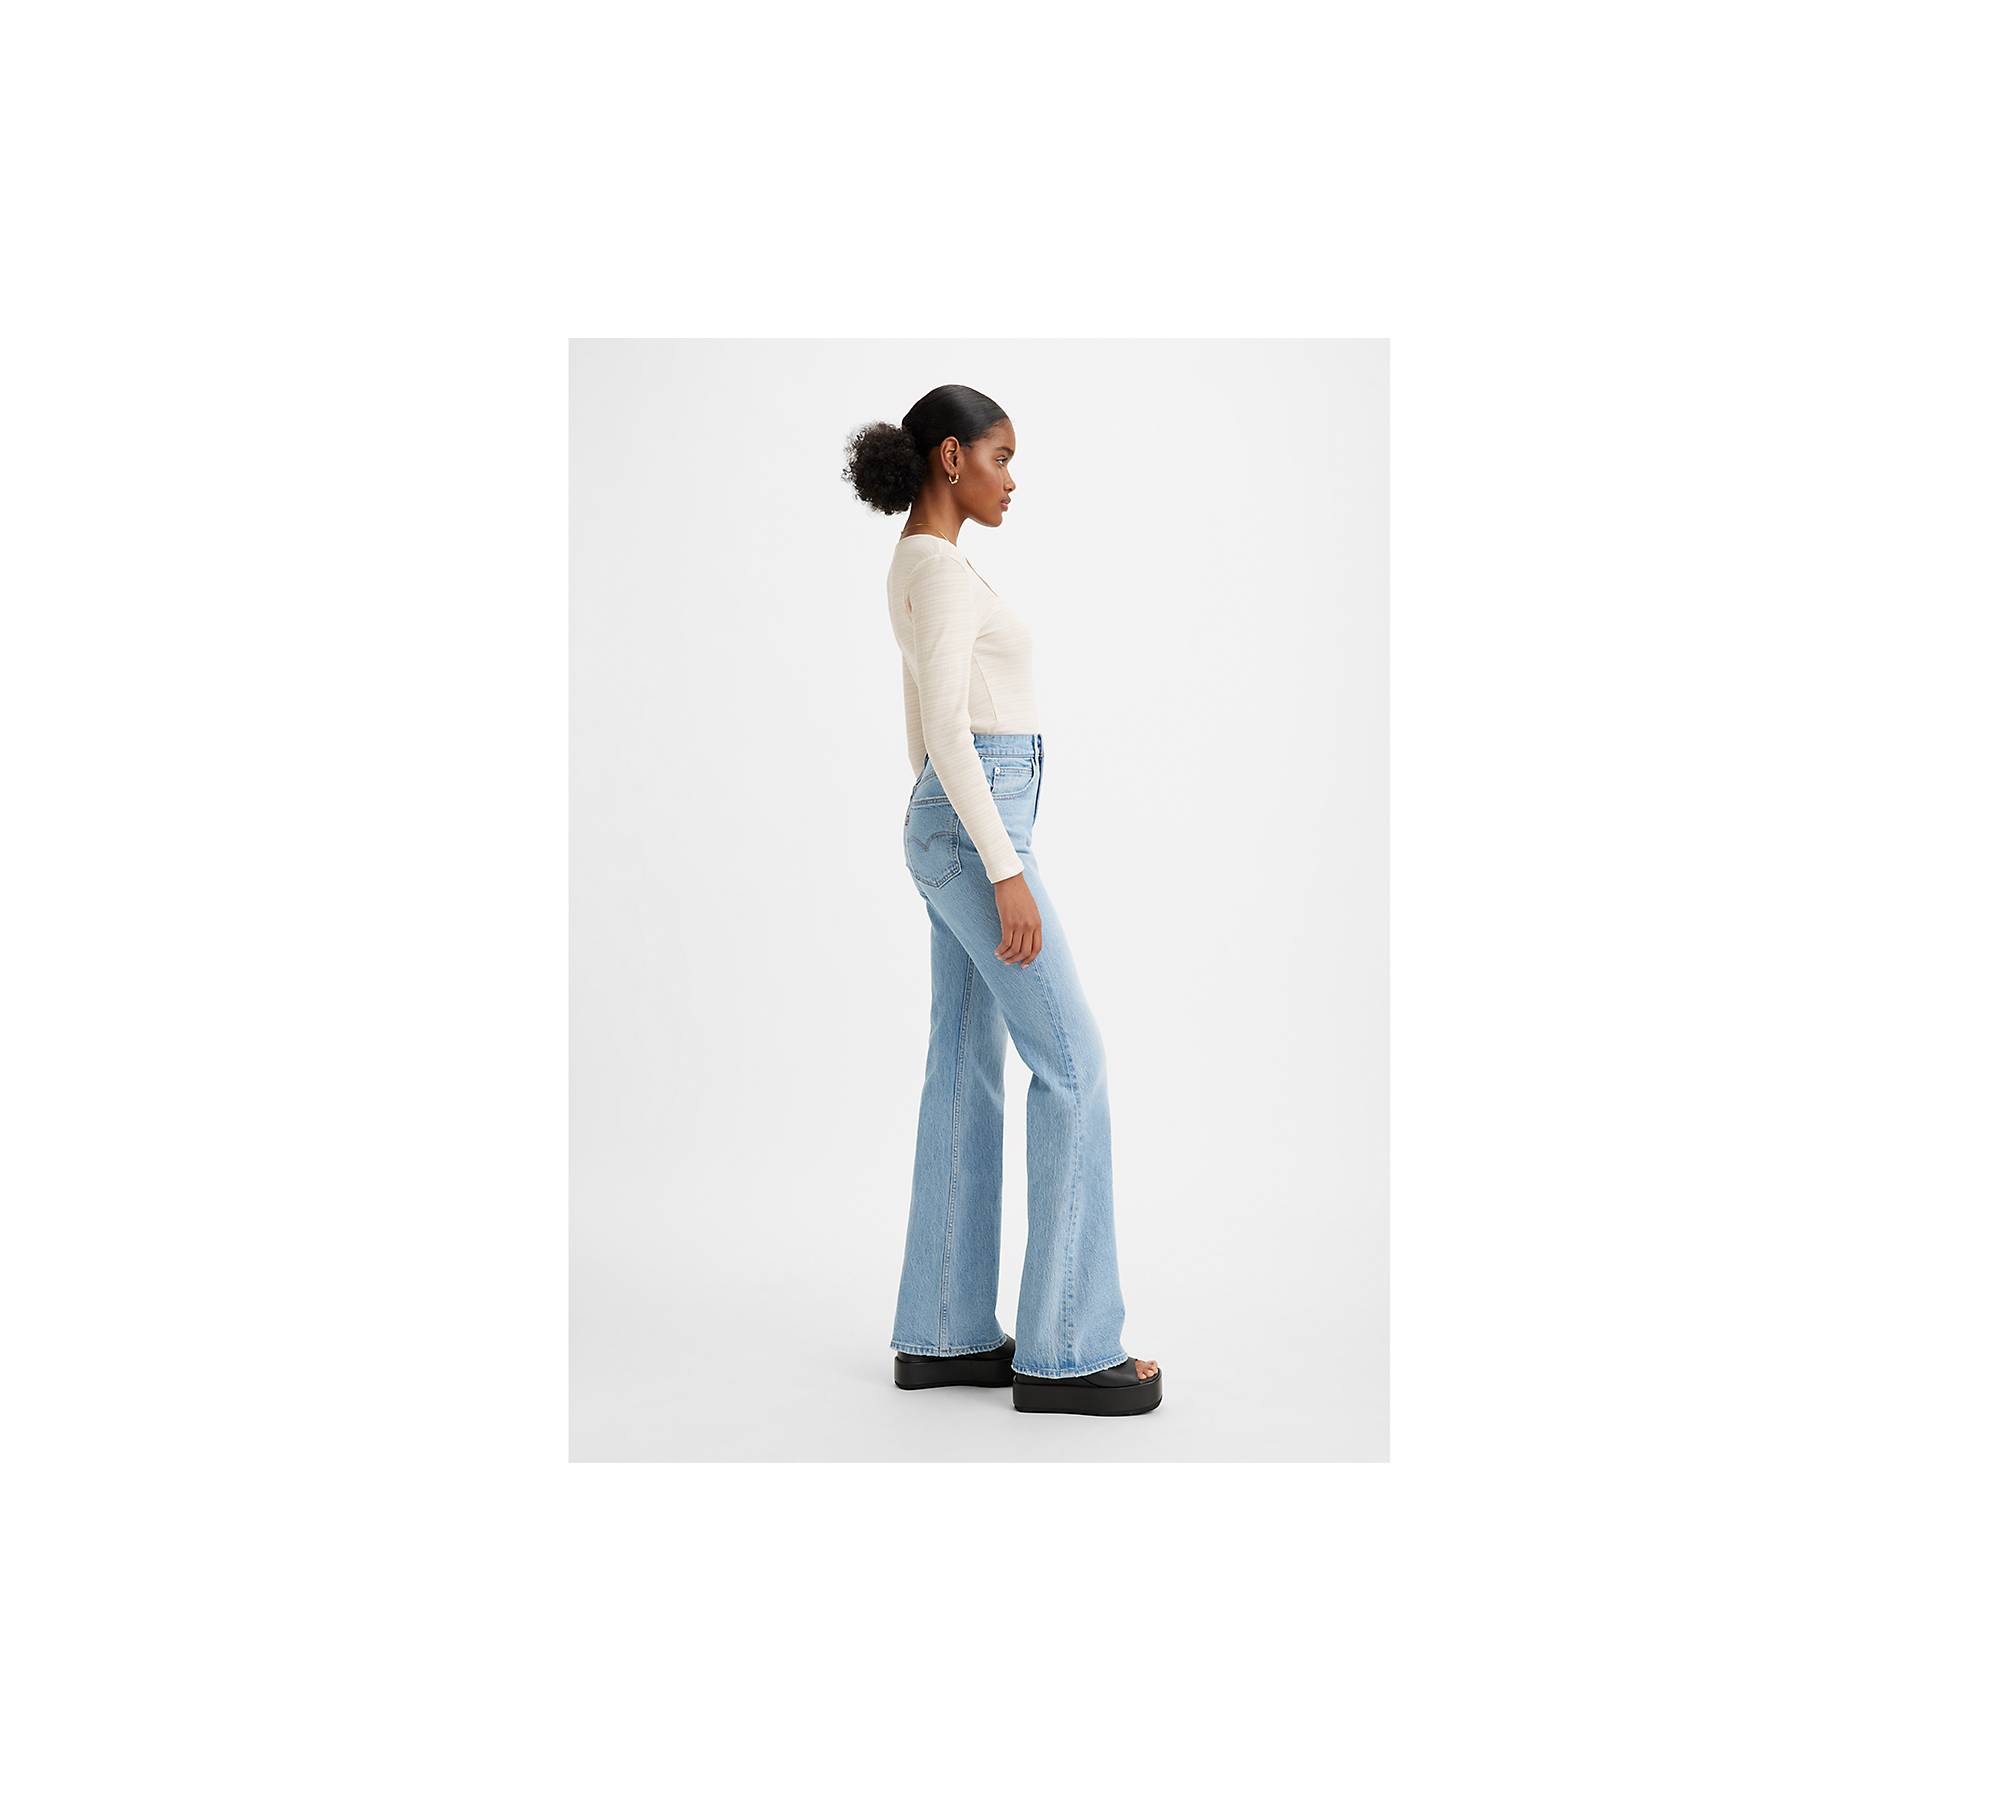 Blue 70s High Flare Jeans by Levi's on Sale